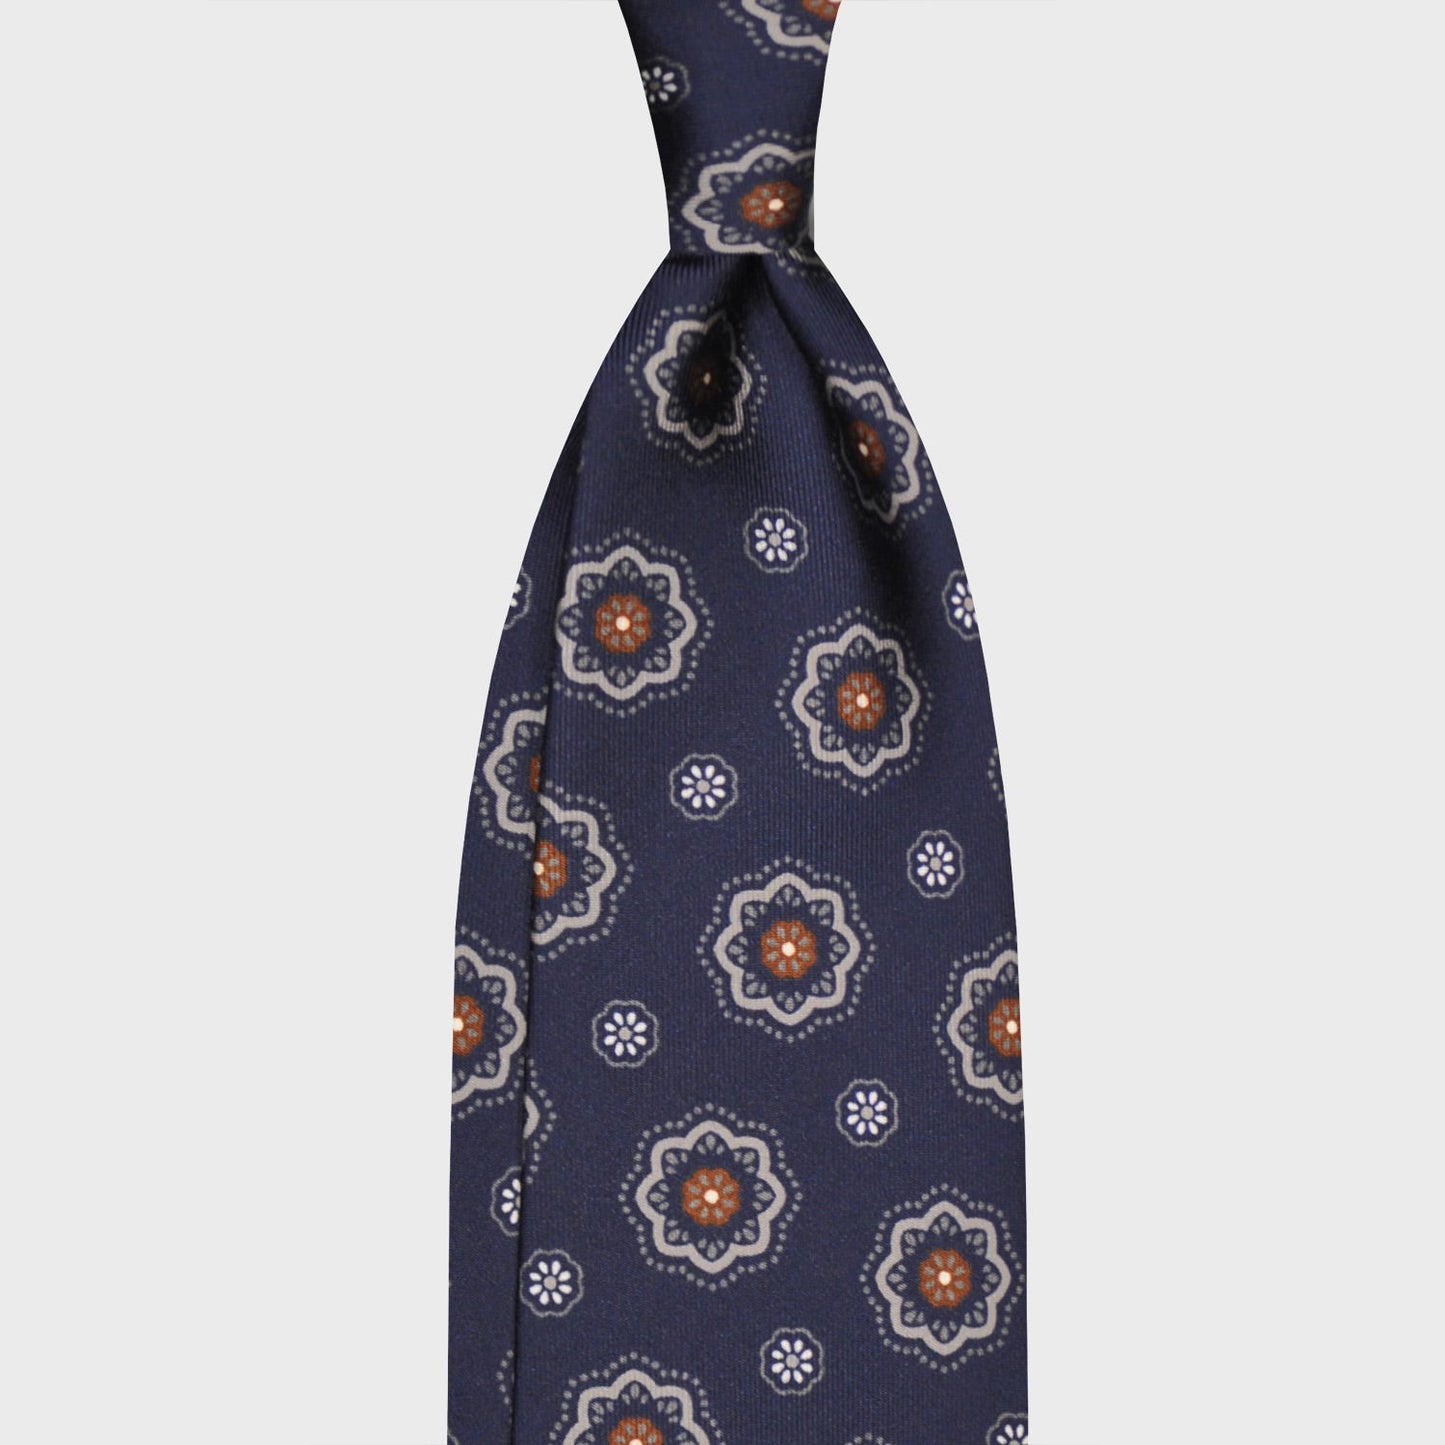 Load image into Gallery viewer, F.Marino Silk Tie 7 Folds Medallions Daisy Navy Blue-Wools Boutique Uomo
